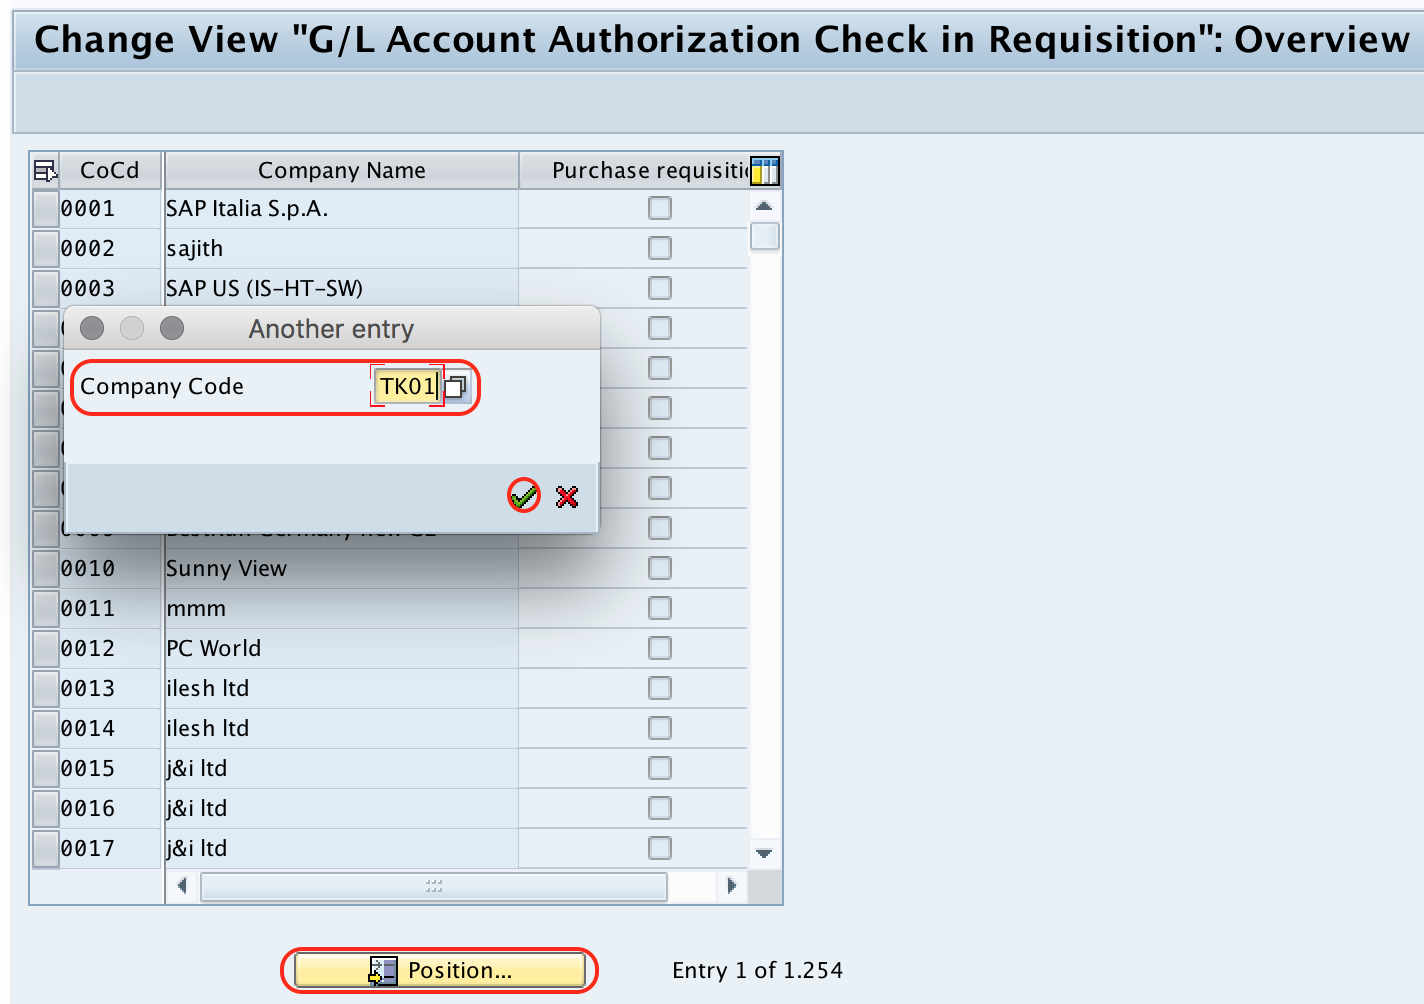 Authorization Check for G:L Account company code